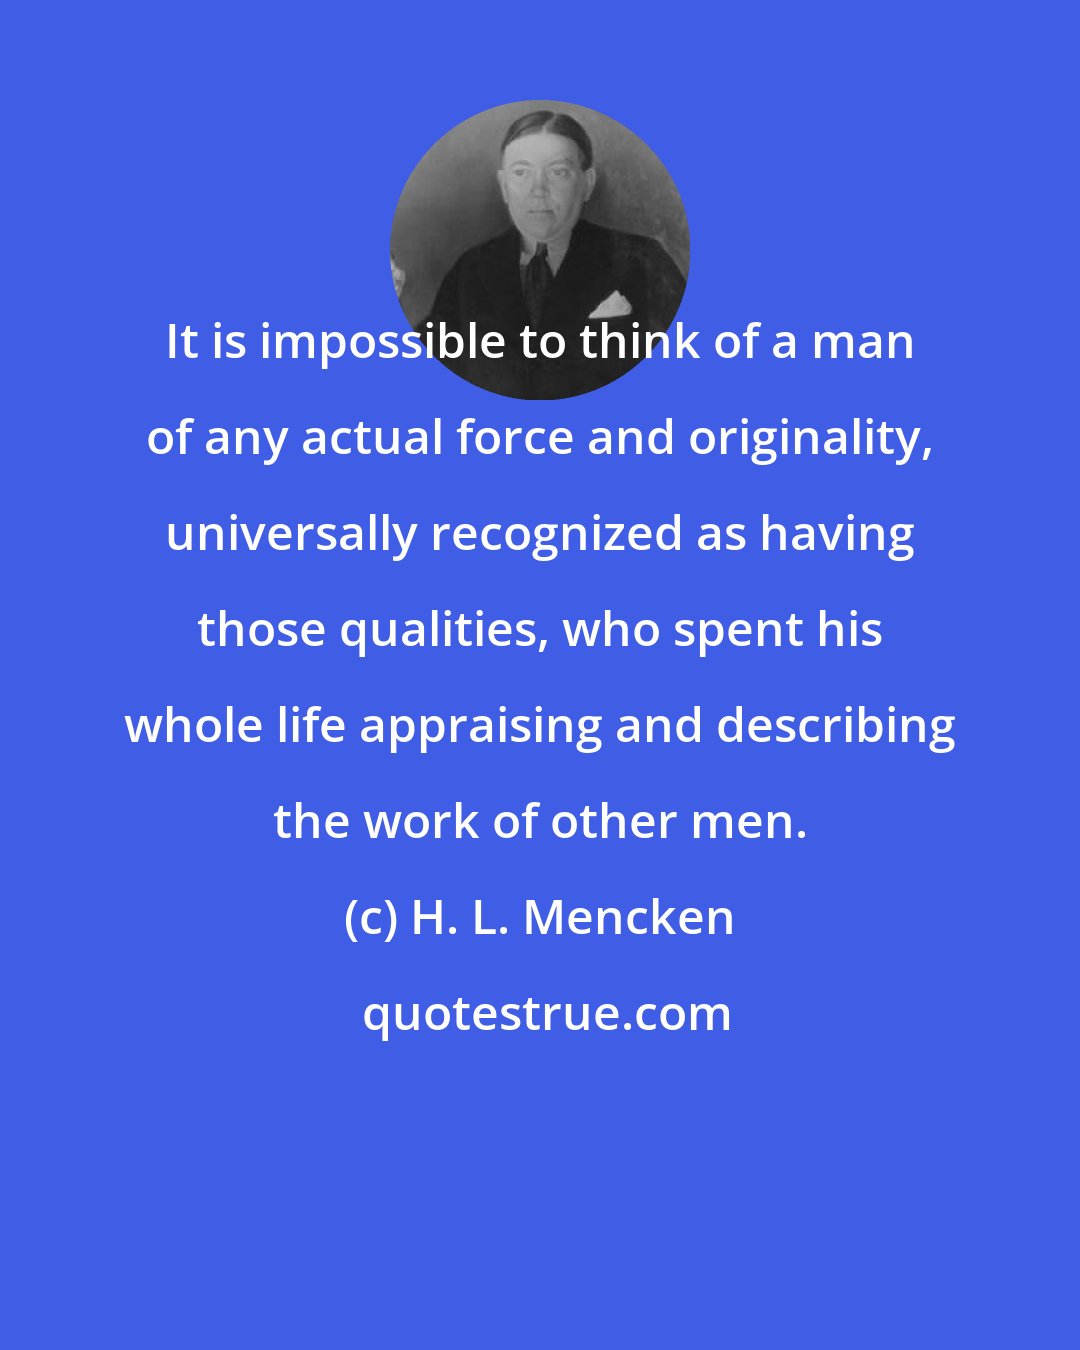 H. L. Mencken: It is impossible to think of a man of any actual force and originality, universally recognized as having those qualities, who spent his whole life appraising and describing the work of other men.